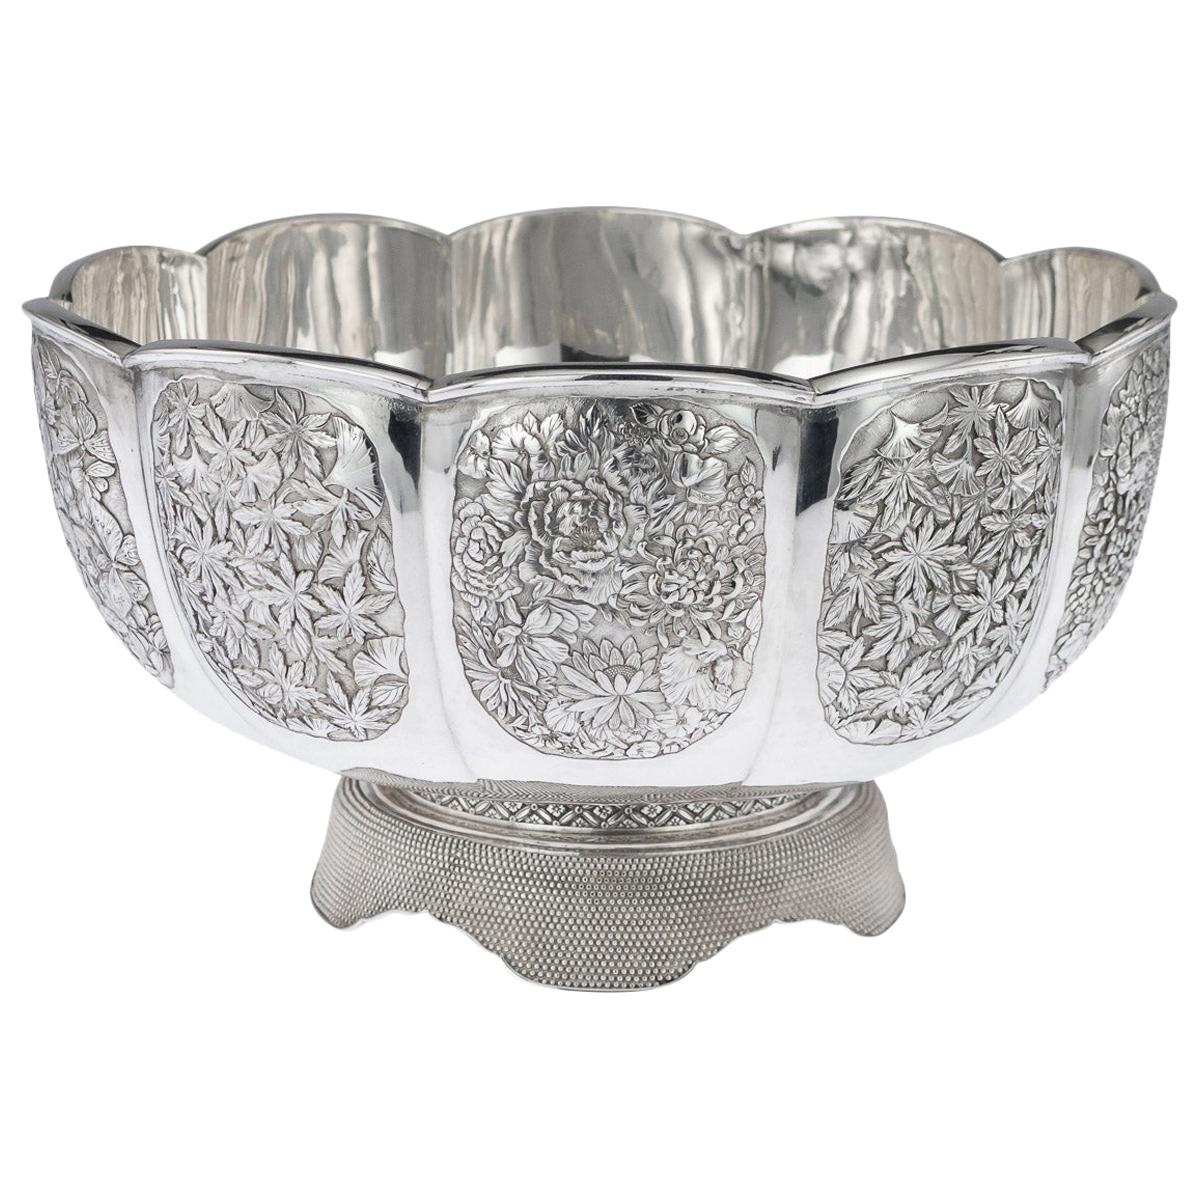 20th Century Meiji Japanese Solid Silver Butterfly Bowl, circa 1900